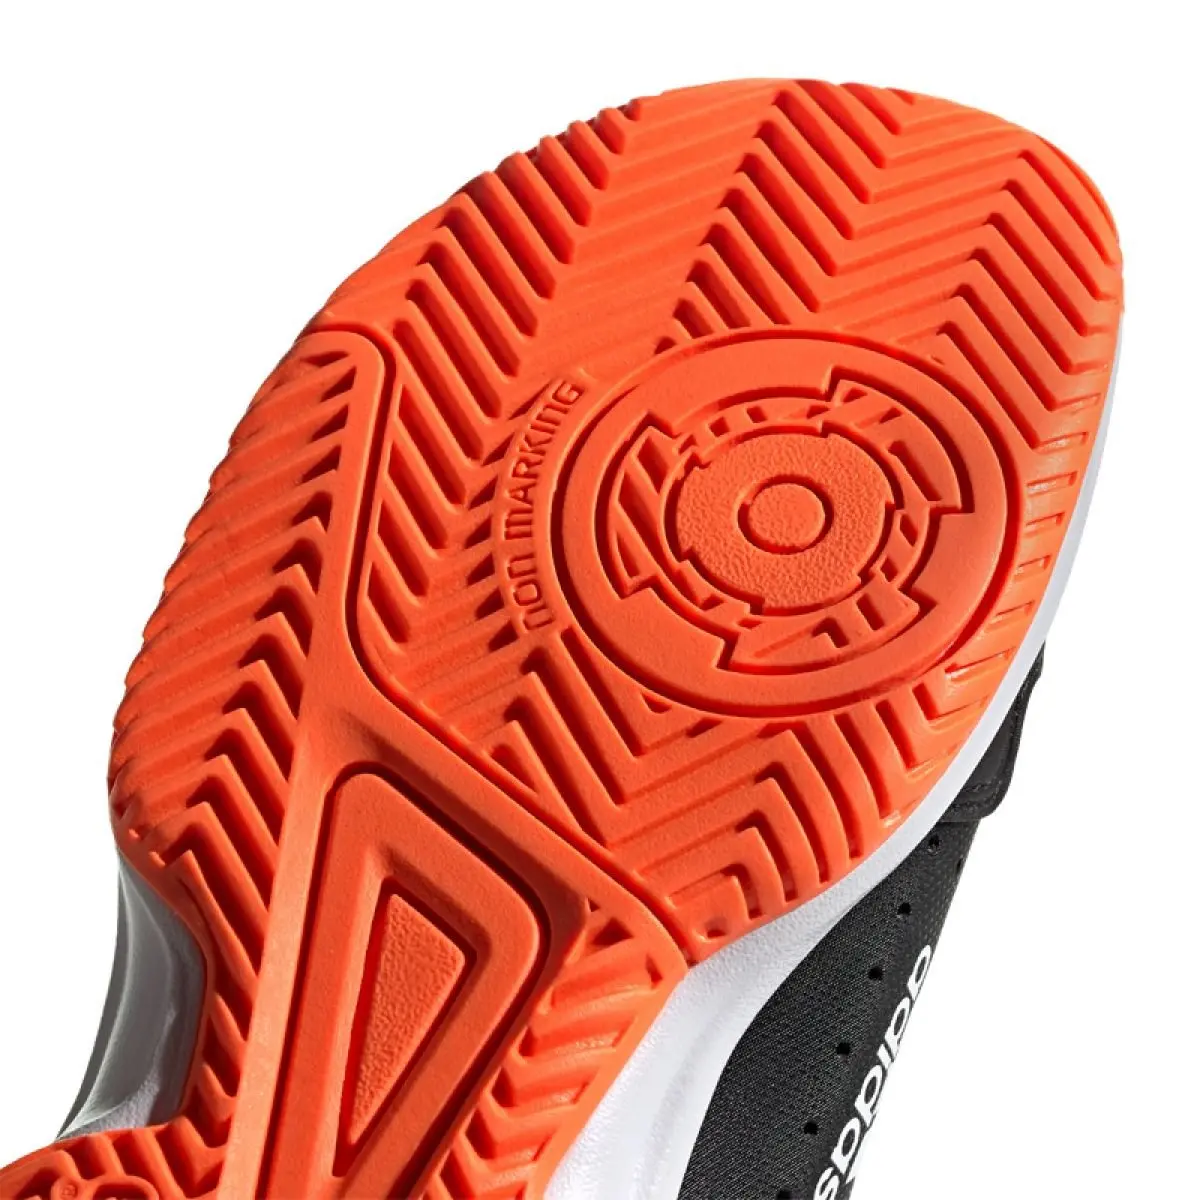 TARMAK By Decathlon Unisex Red Textile Basketball Non-Marking Shoes Price  in India, Full Specifications & Offers | DTashion.com